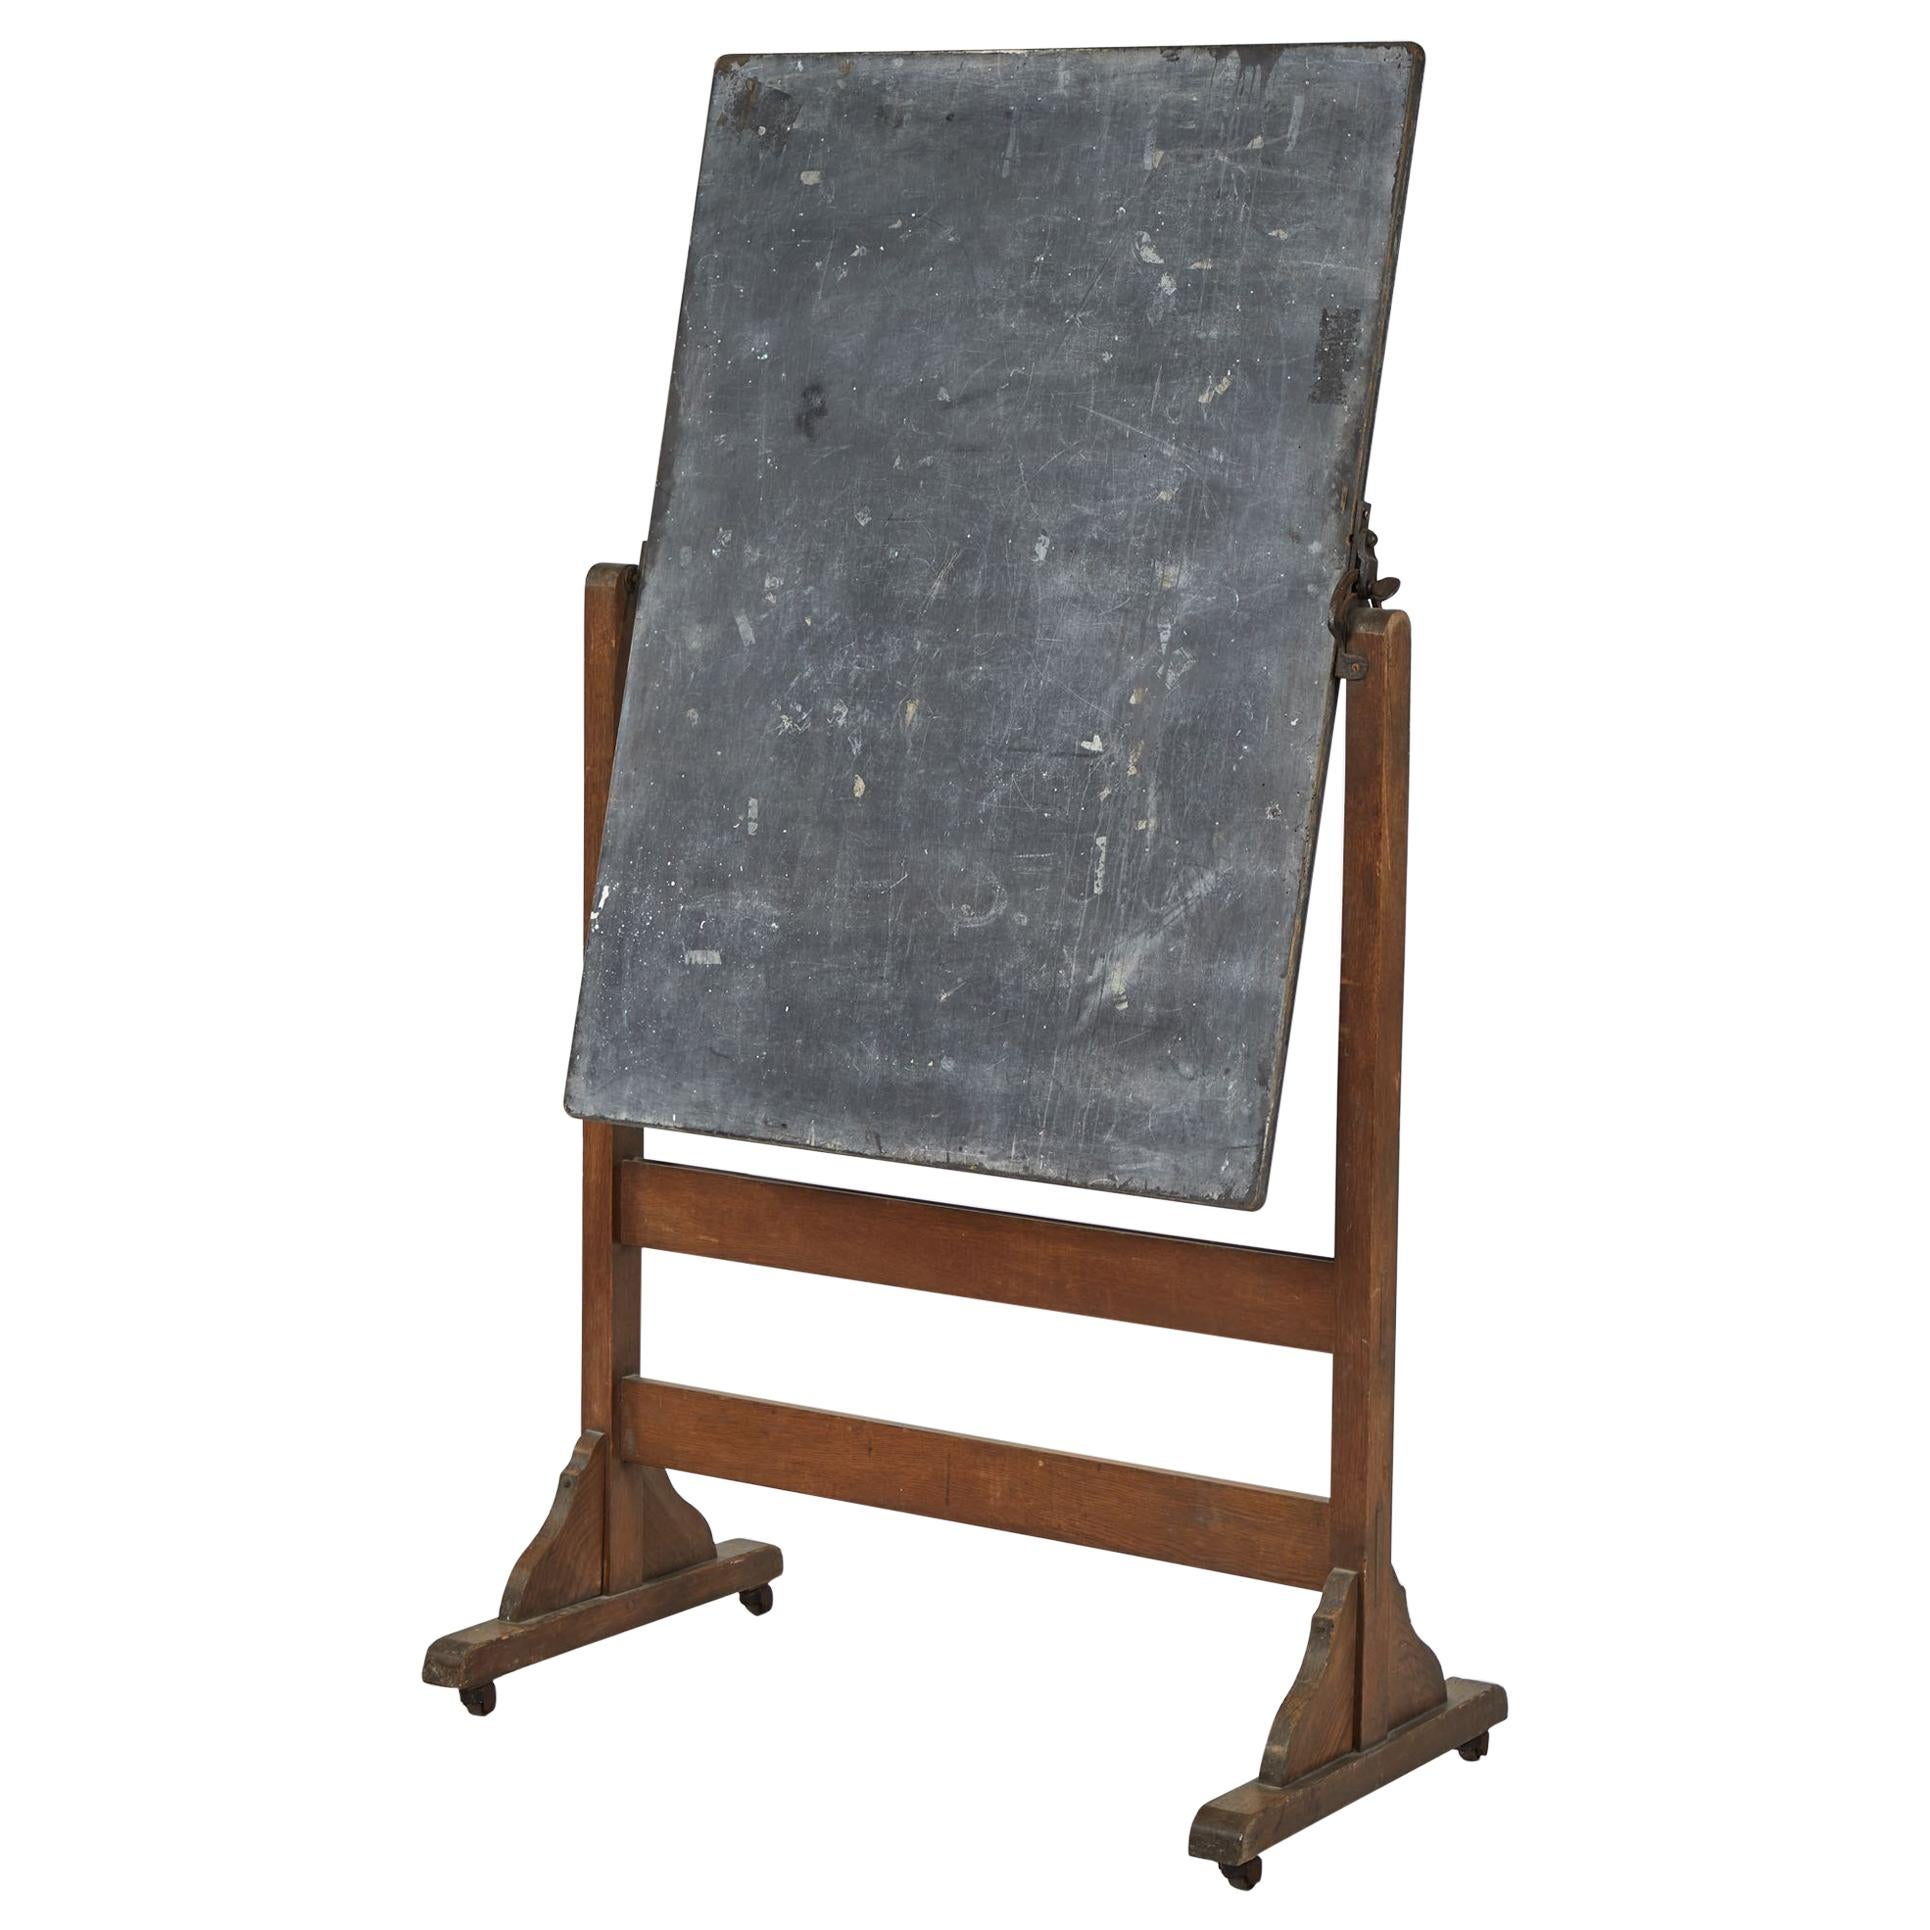 Chalkboard on Stand with Hinge